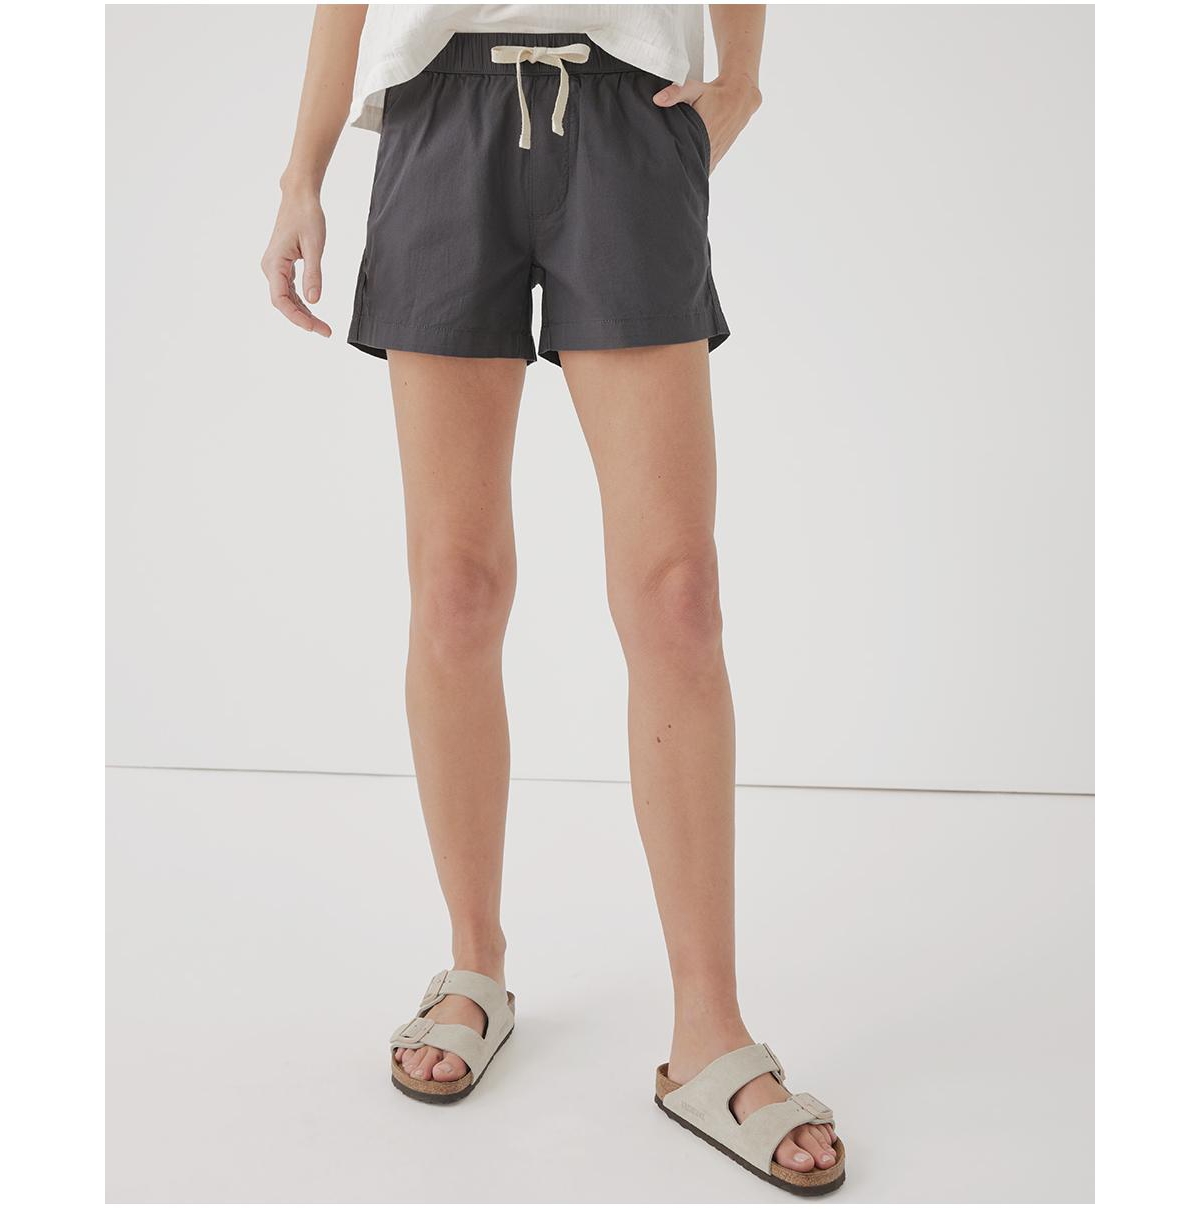 Cotton Classic Woven Twill Drawstring Short - French navy